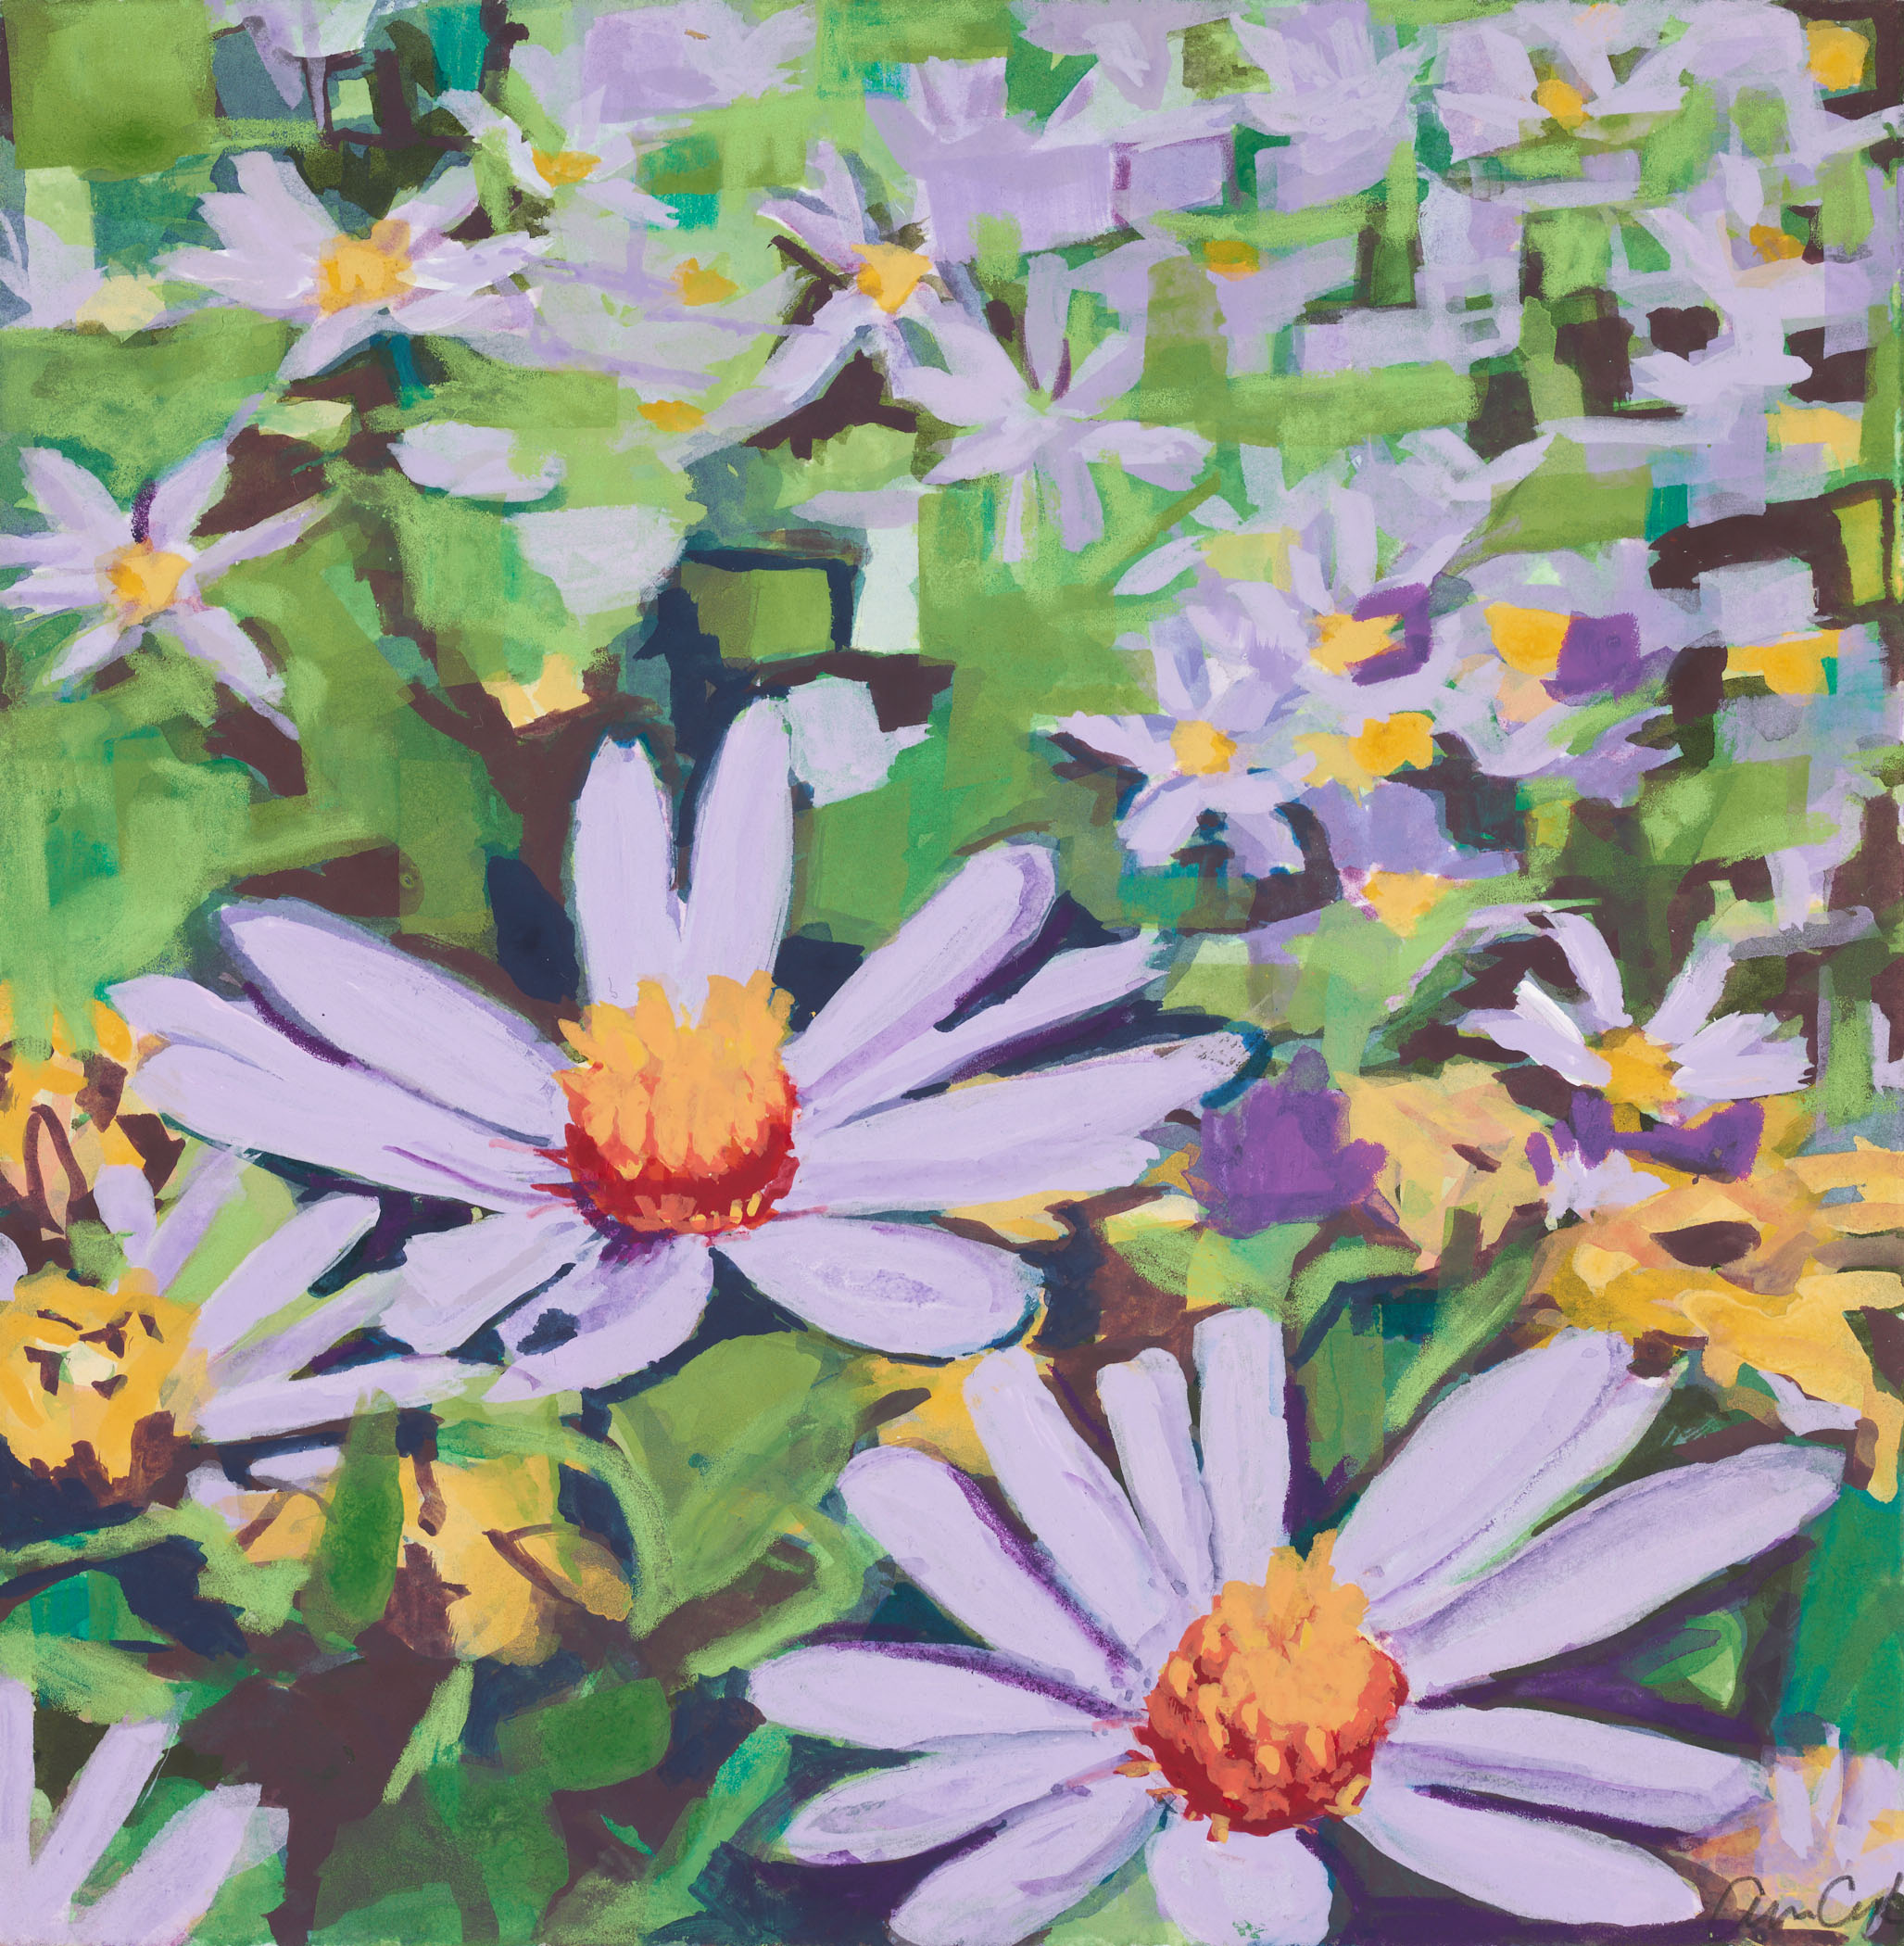 Wild Asters, 2021, mixed media on paper, 8 x 8 inches